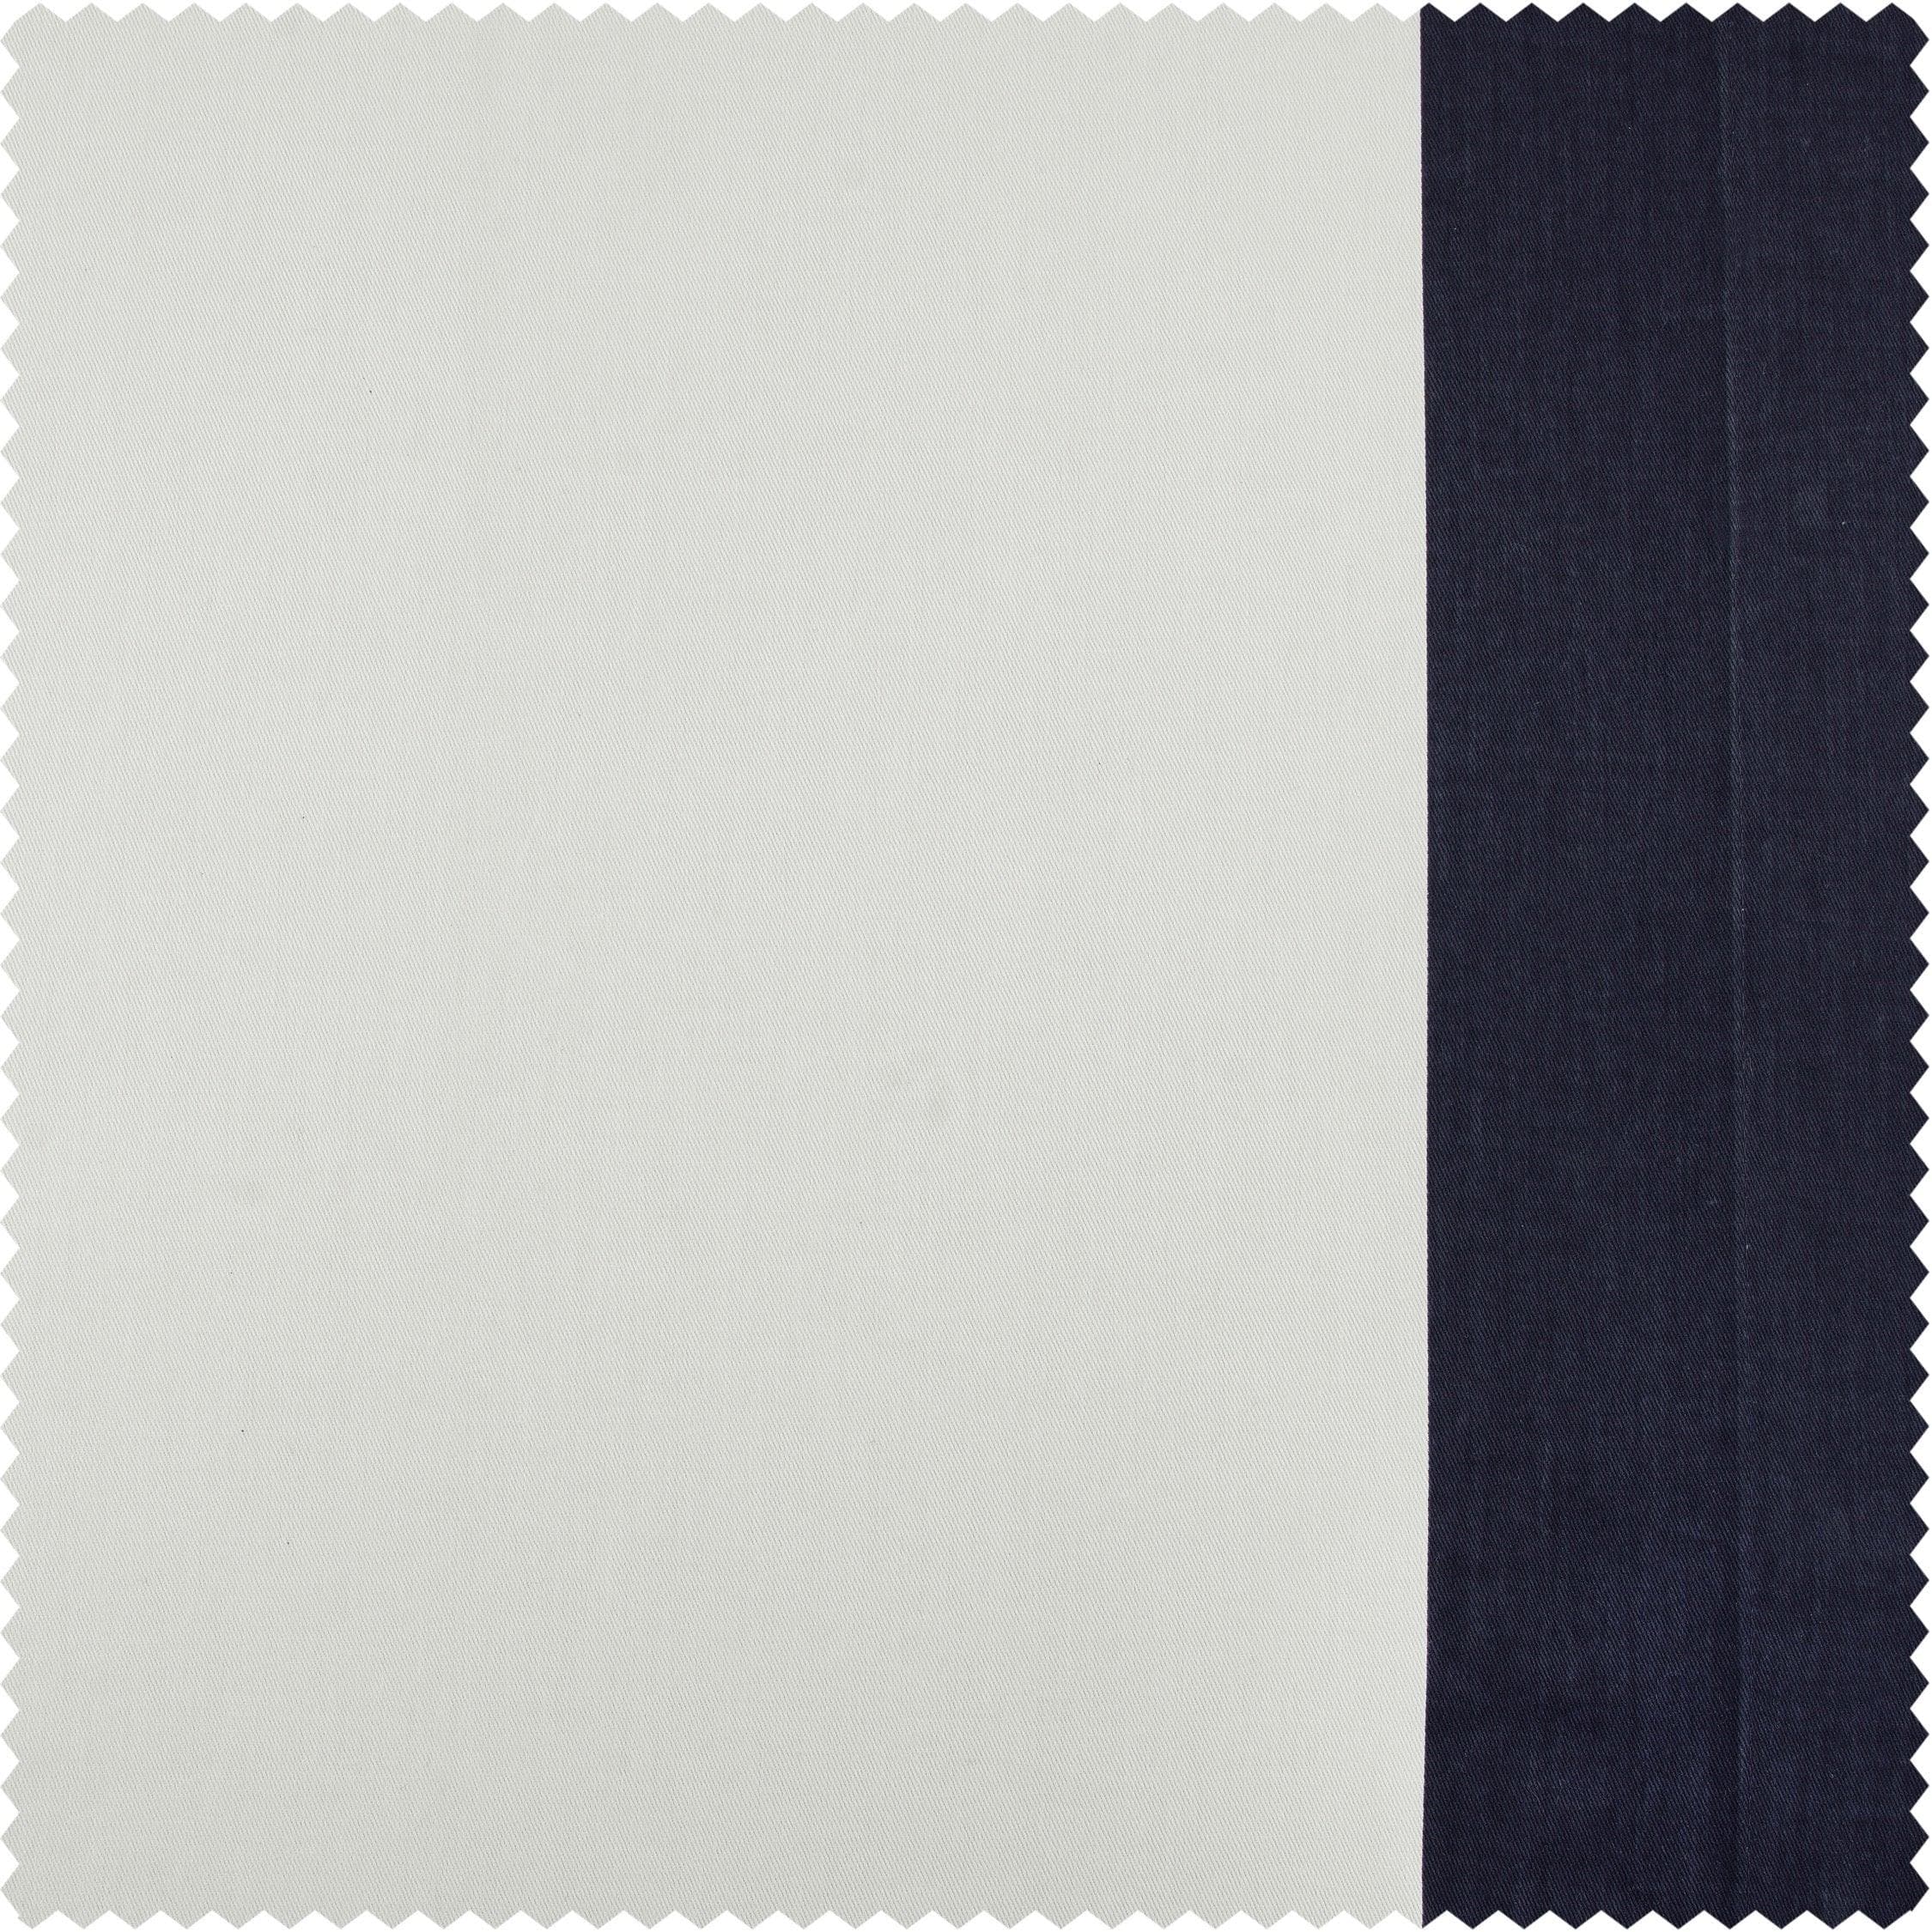 Fresh Popcorn & Polo Navy Vertical Printed Cotton Swatch